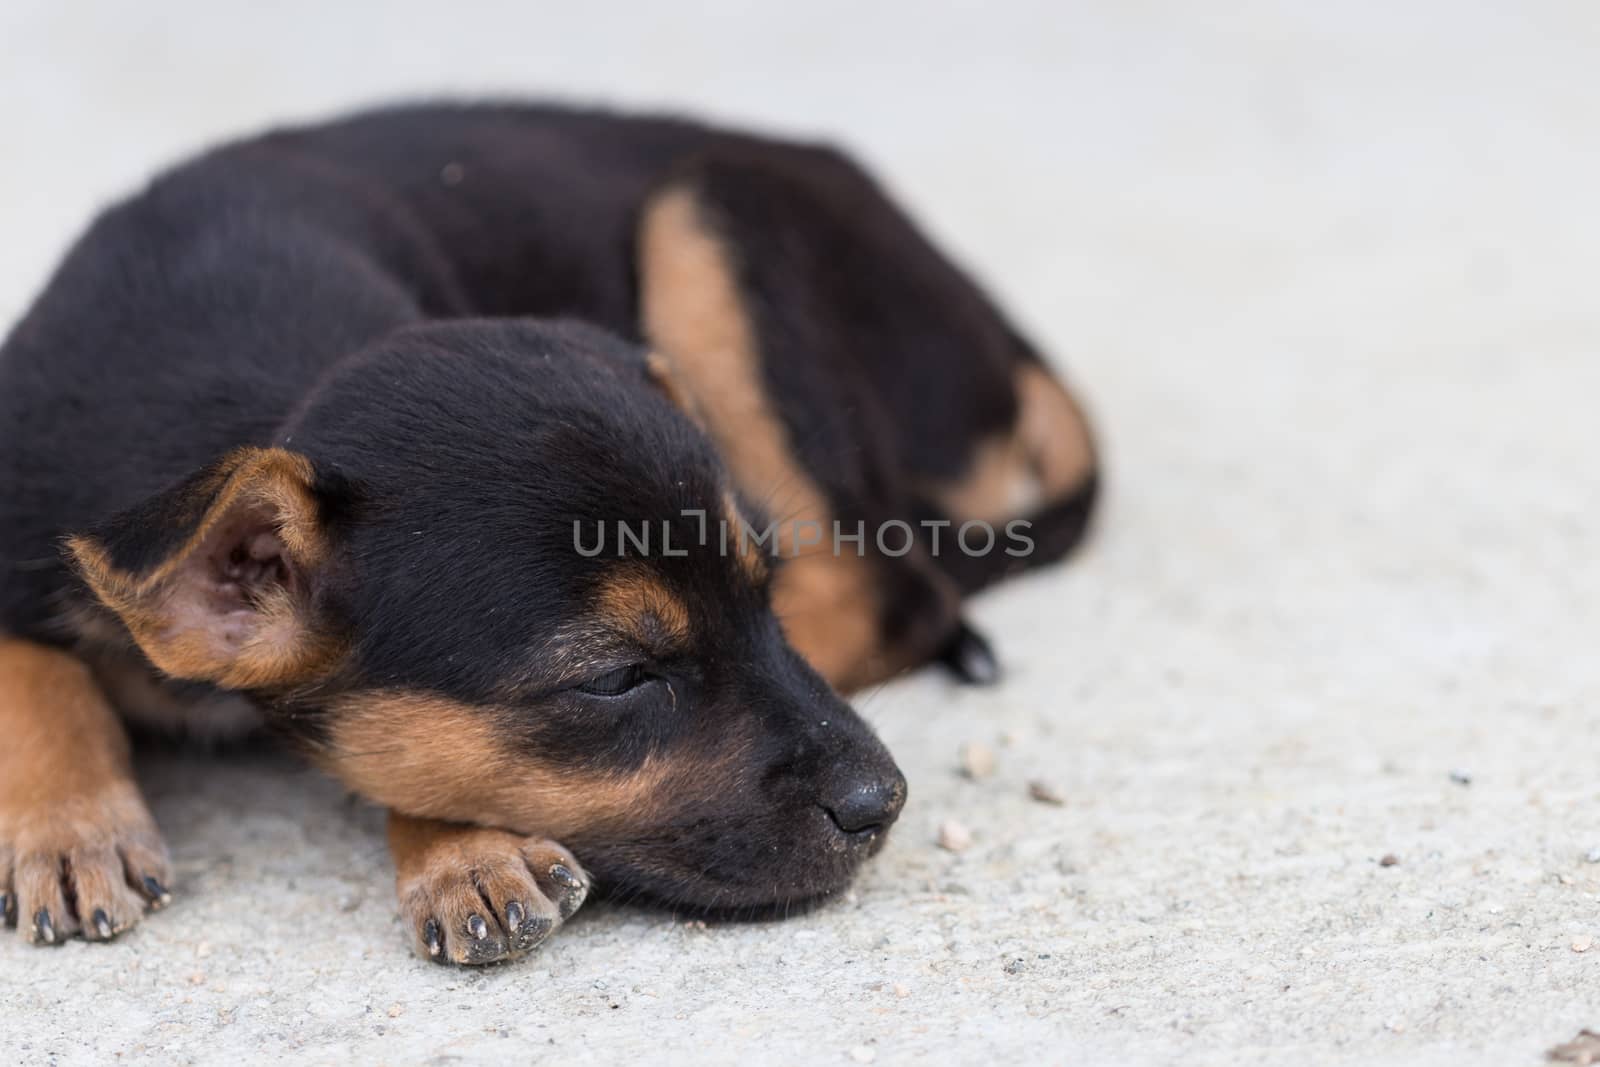 close up squalid young baby dog by blackzheep